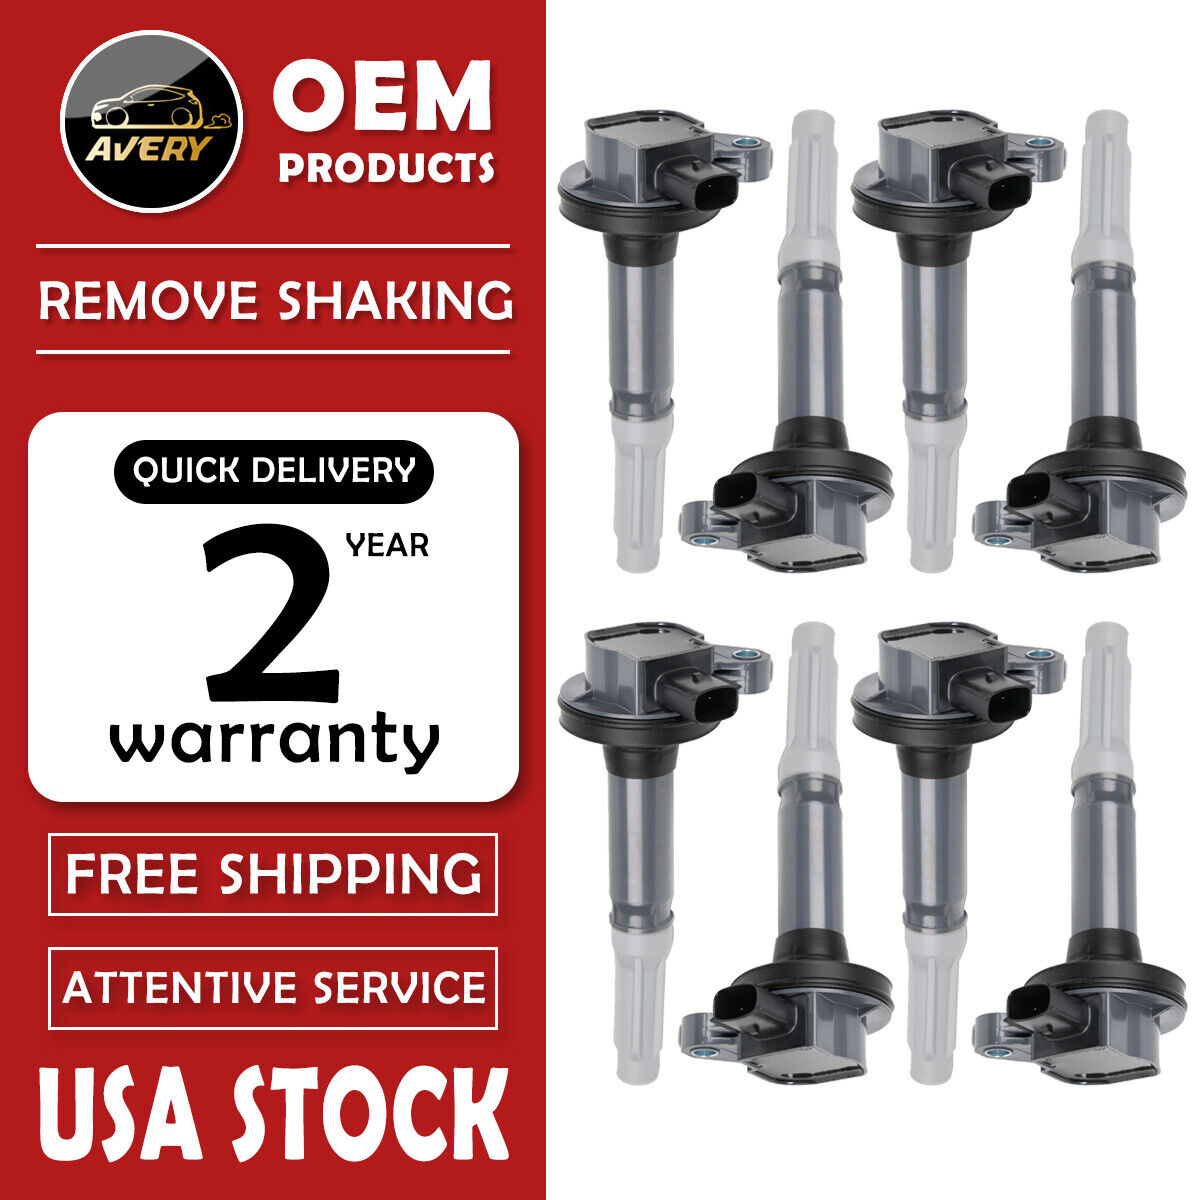 Pack of 8 Ignition Coils For Ford F-150 Ford Mustang 2011-16 5.0L V8 DG542 UF622